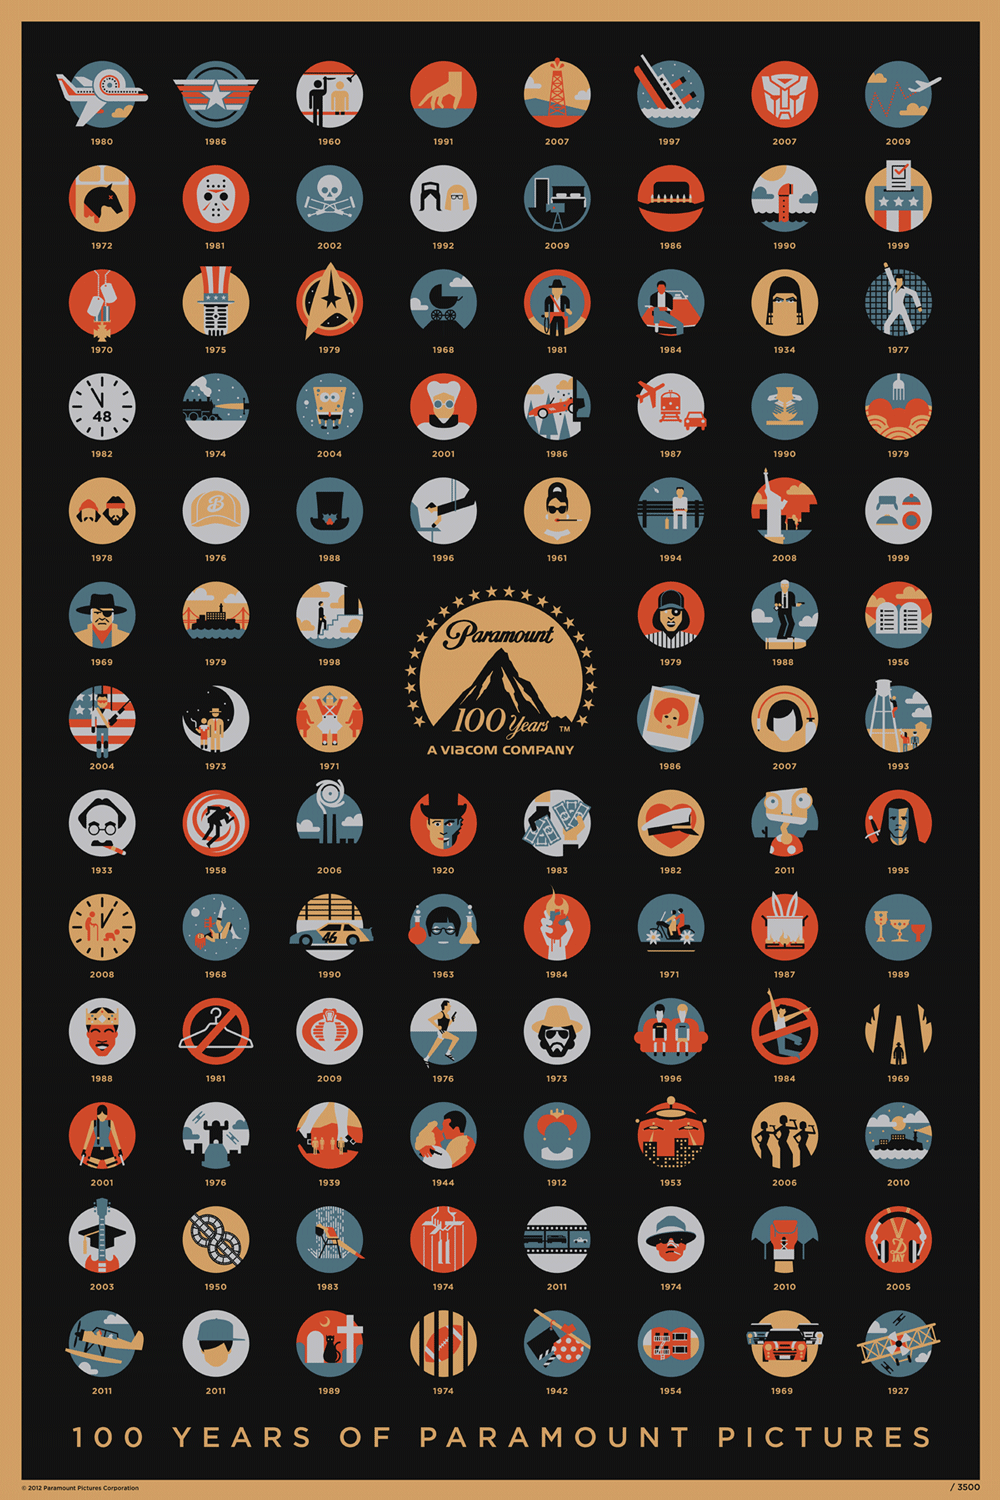 100 Years of Paramount Pictures by DKNGstudio